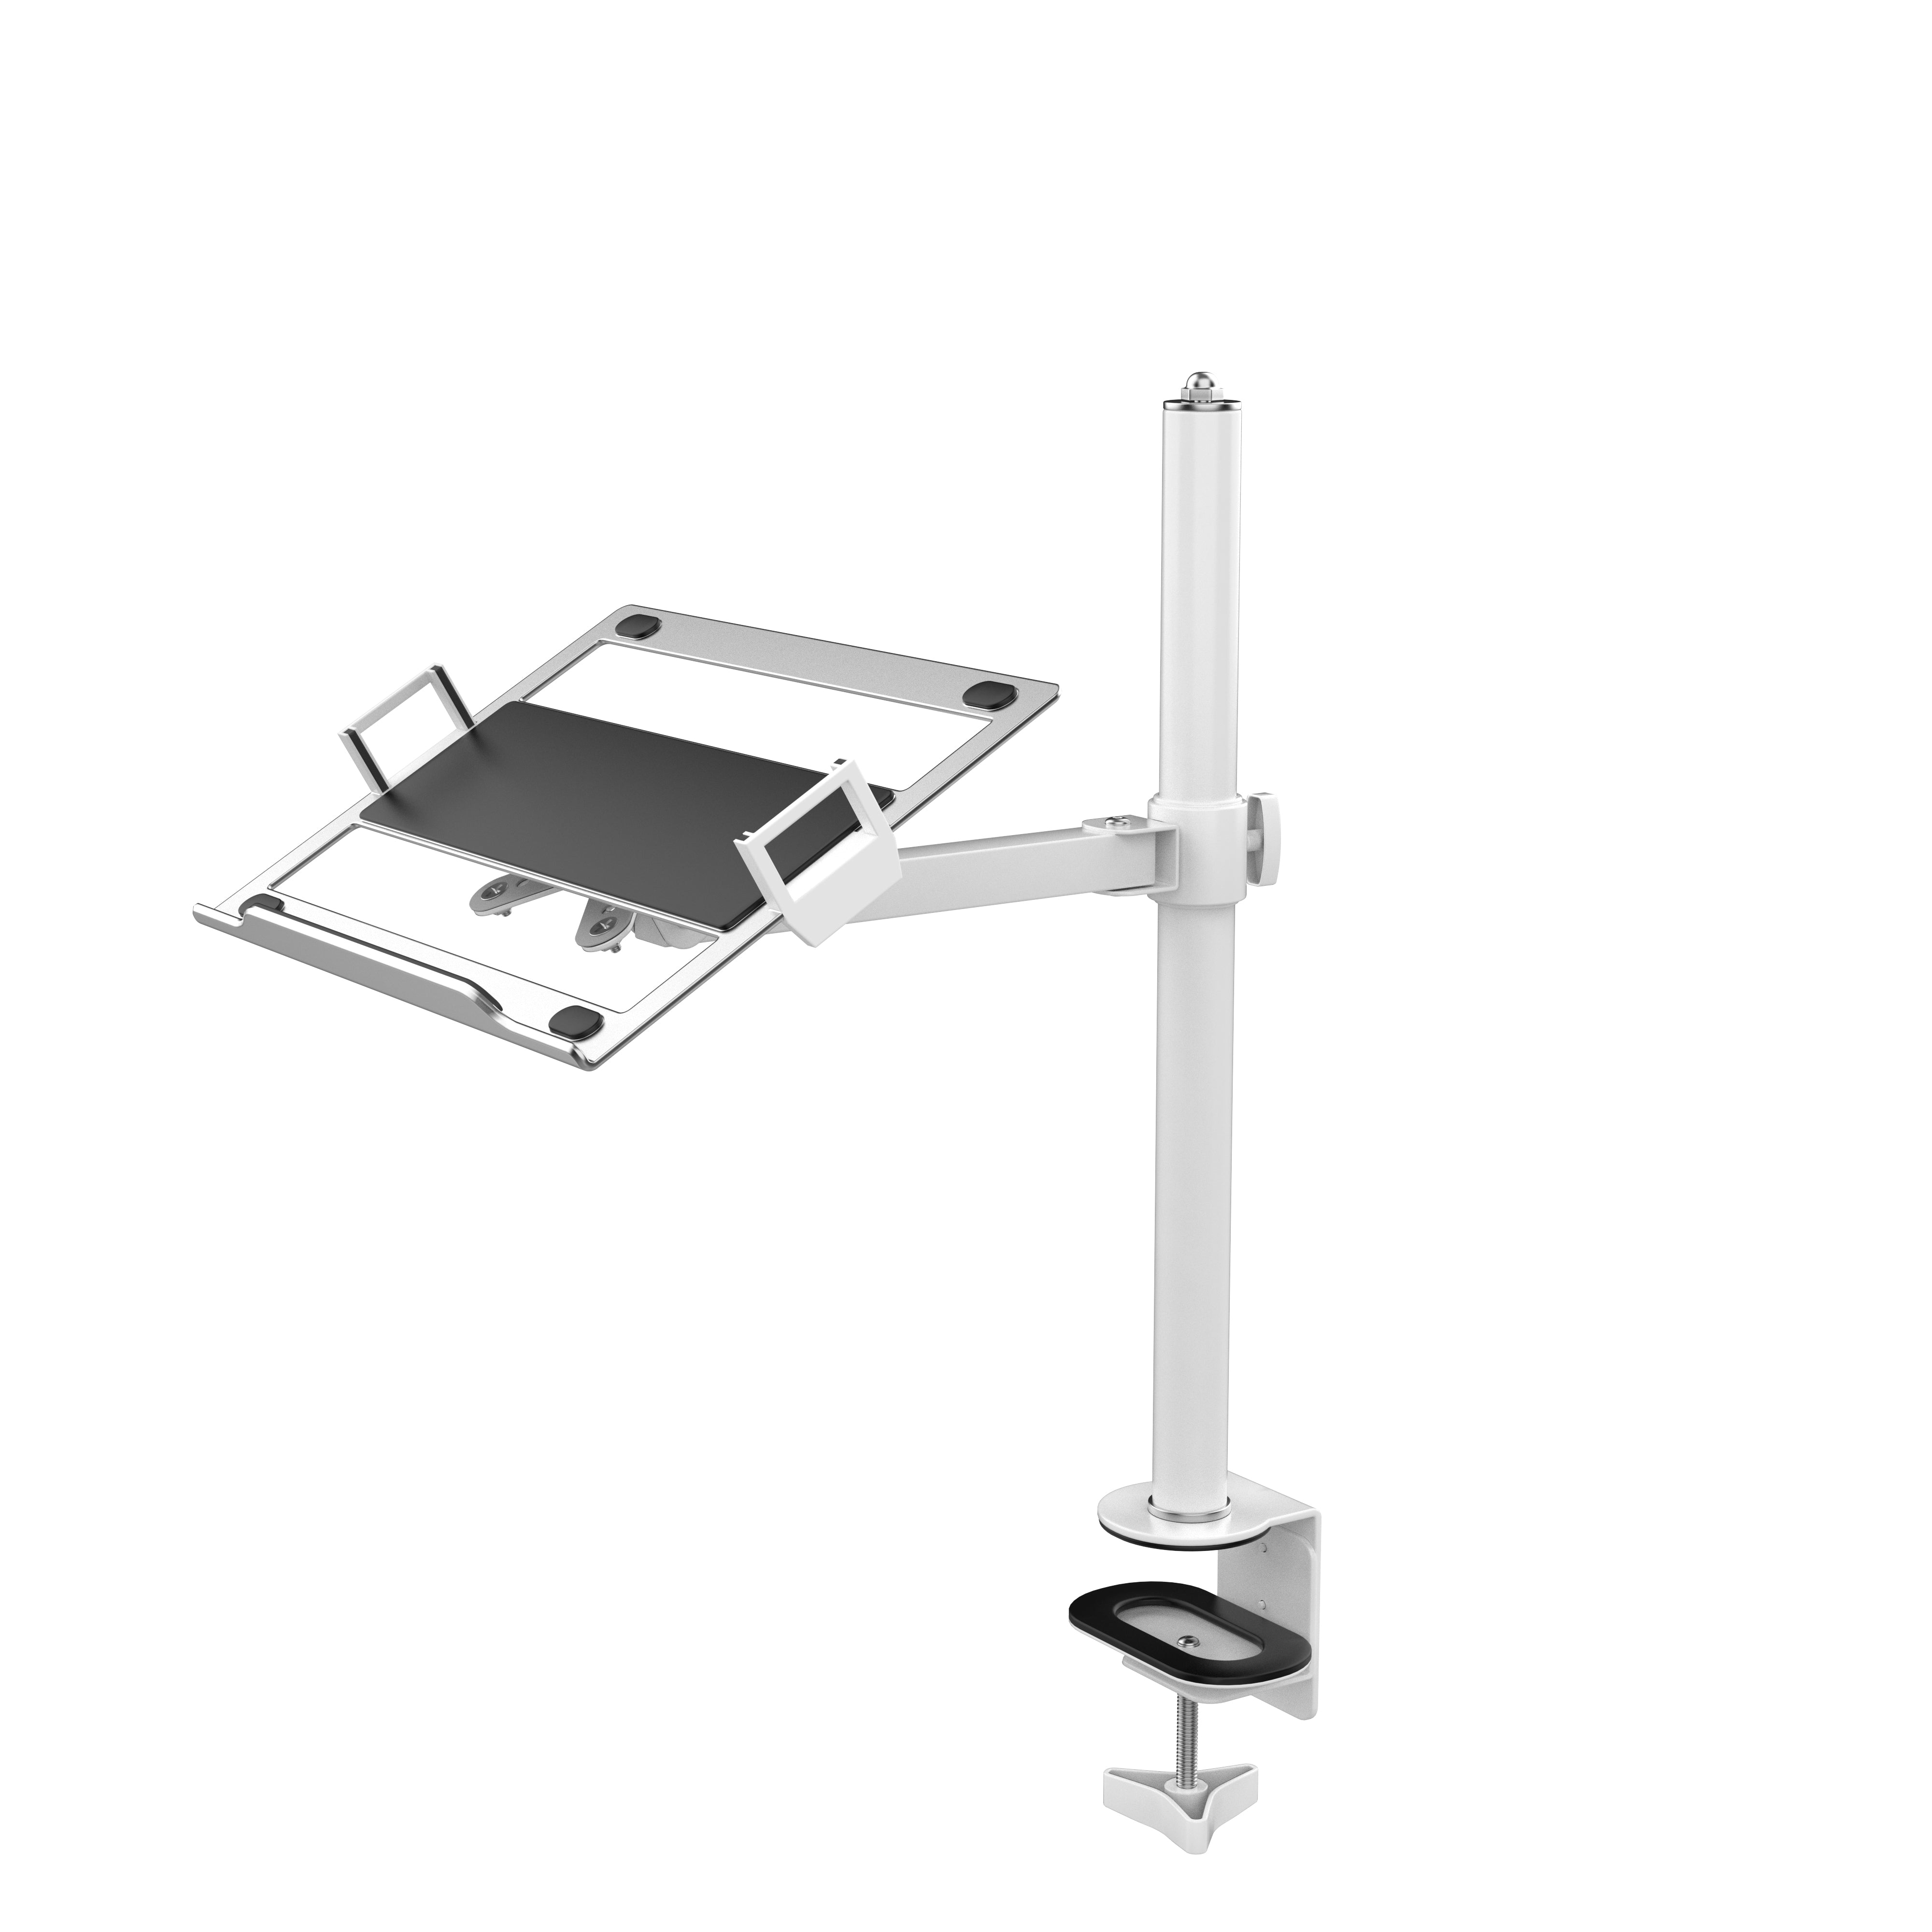 Articulating Laptop Plate and Pole Clamp Mount